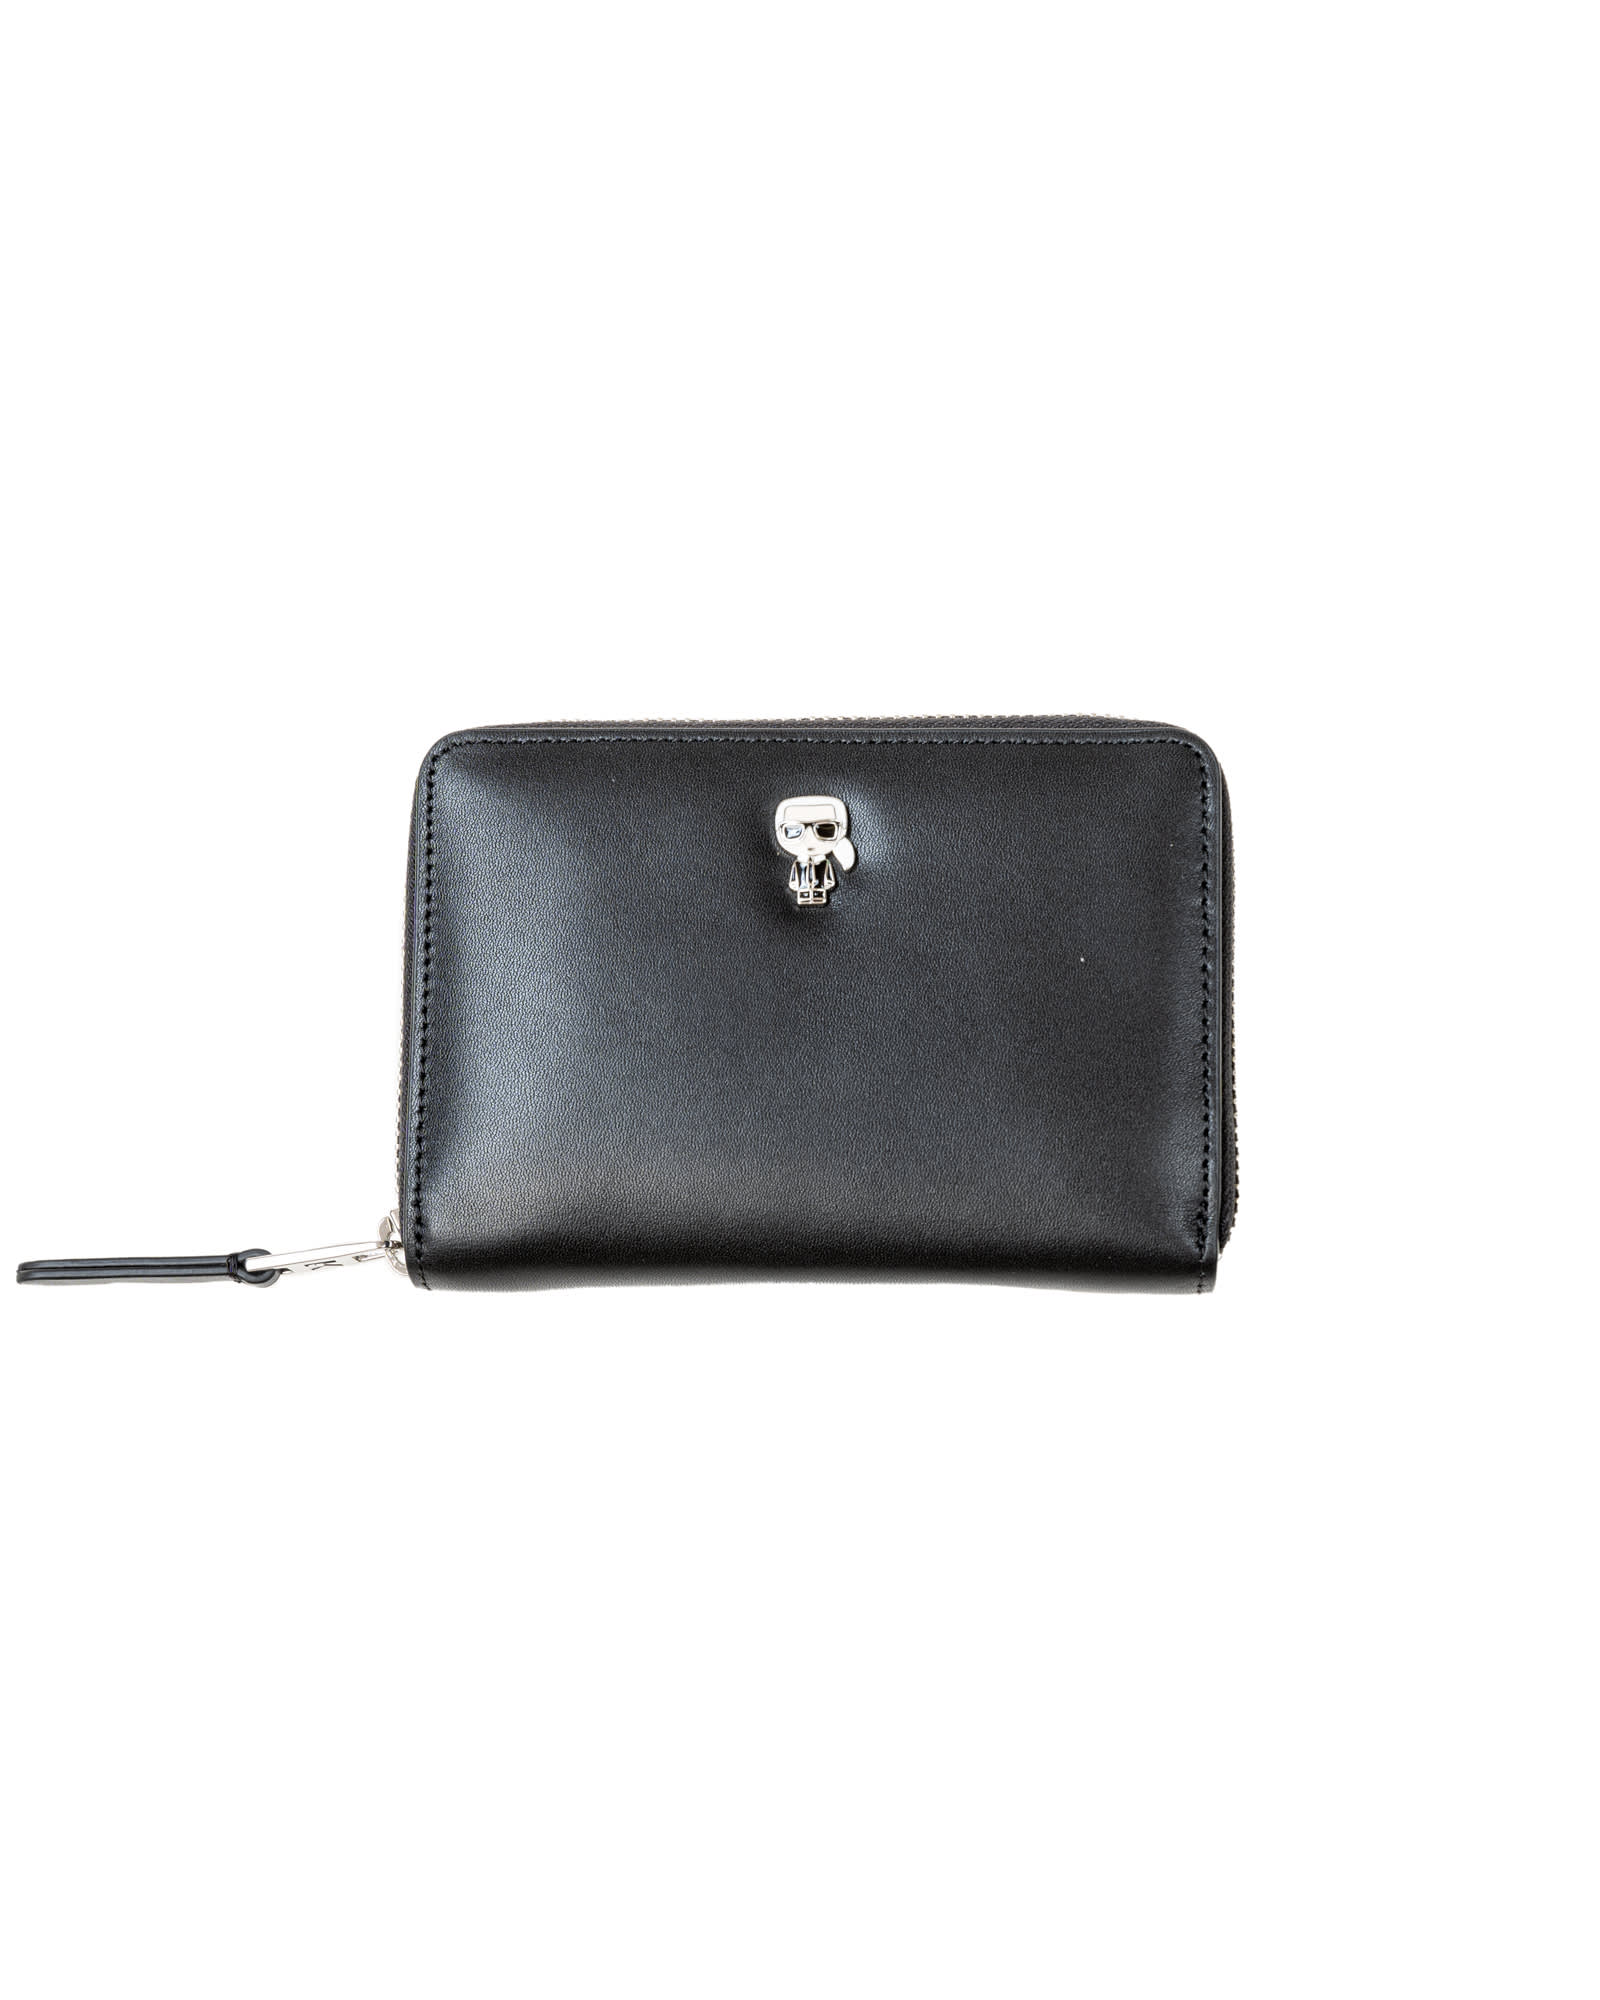 Karl Lagerfeld compact leather wallet, featuring a K / Ikonik graphic brooch